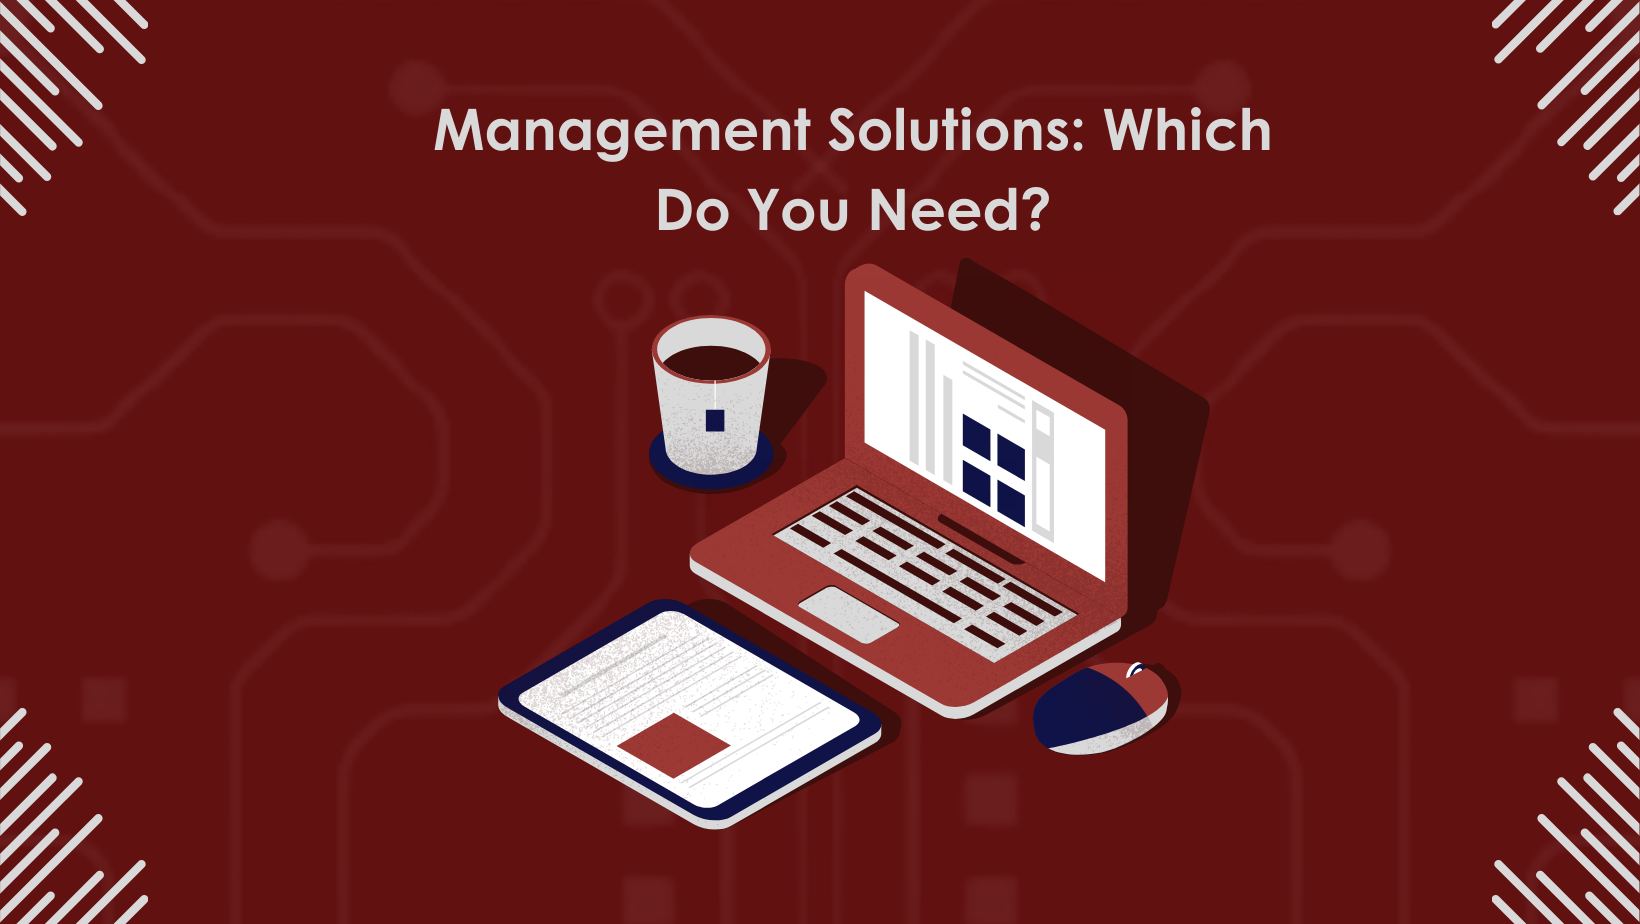 Case Management, Document Management, or Practice Management:   Which Do You Need?